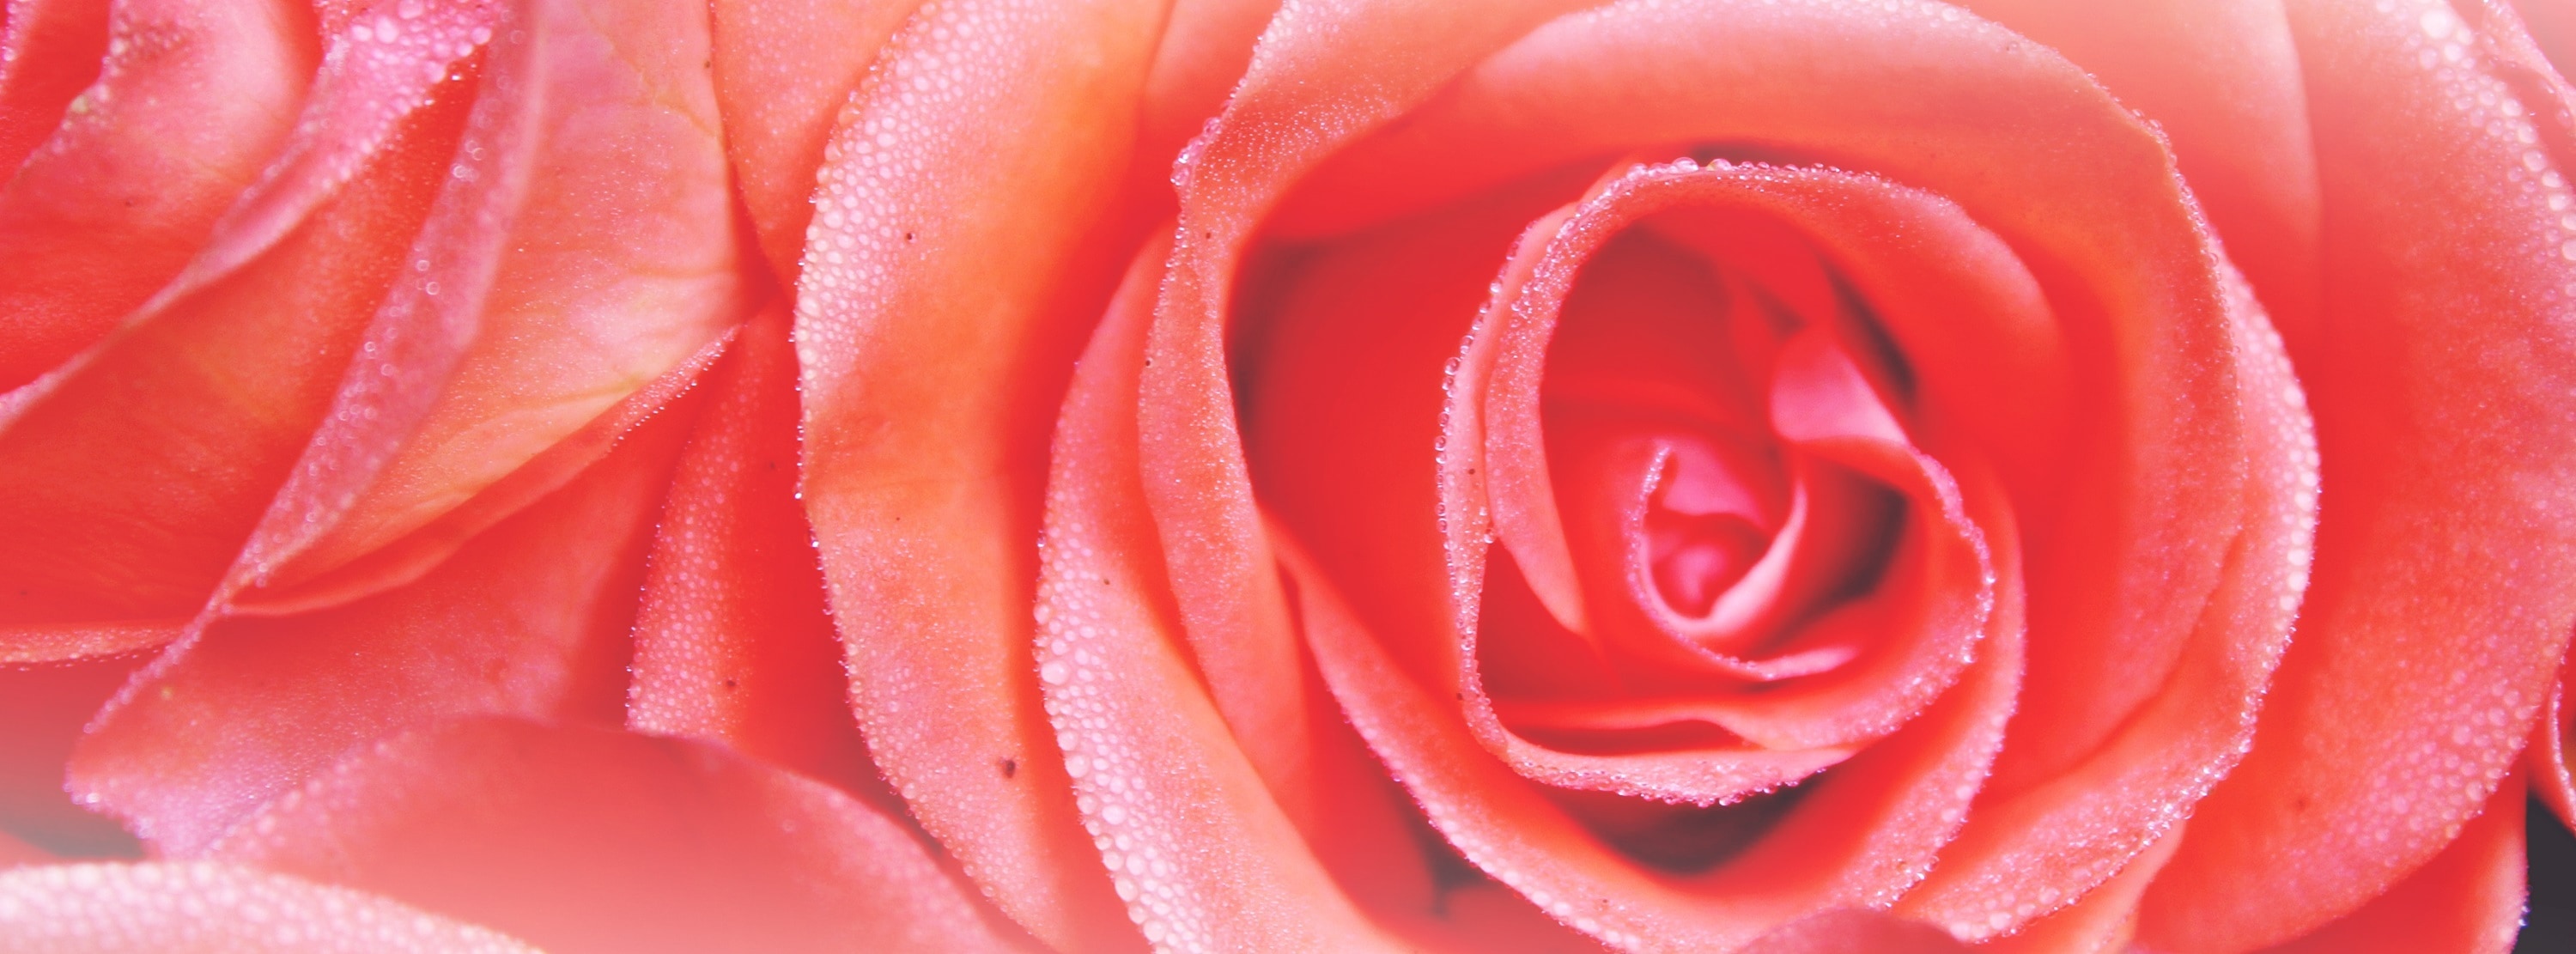 close up view of red rose